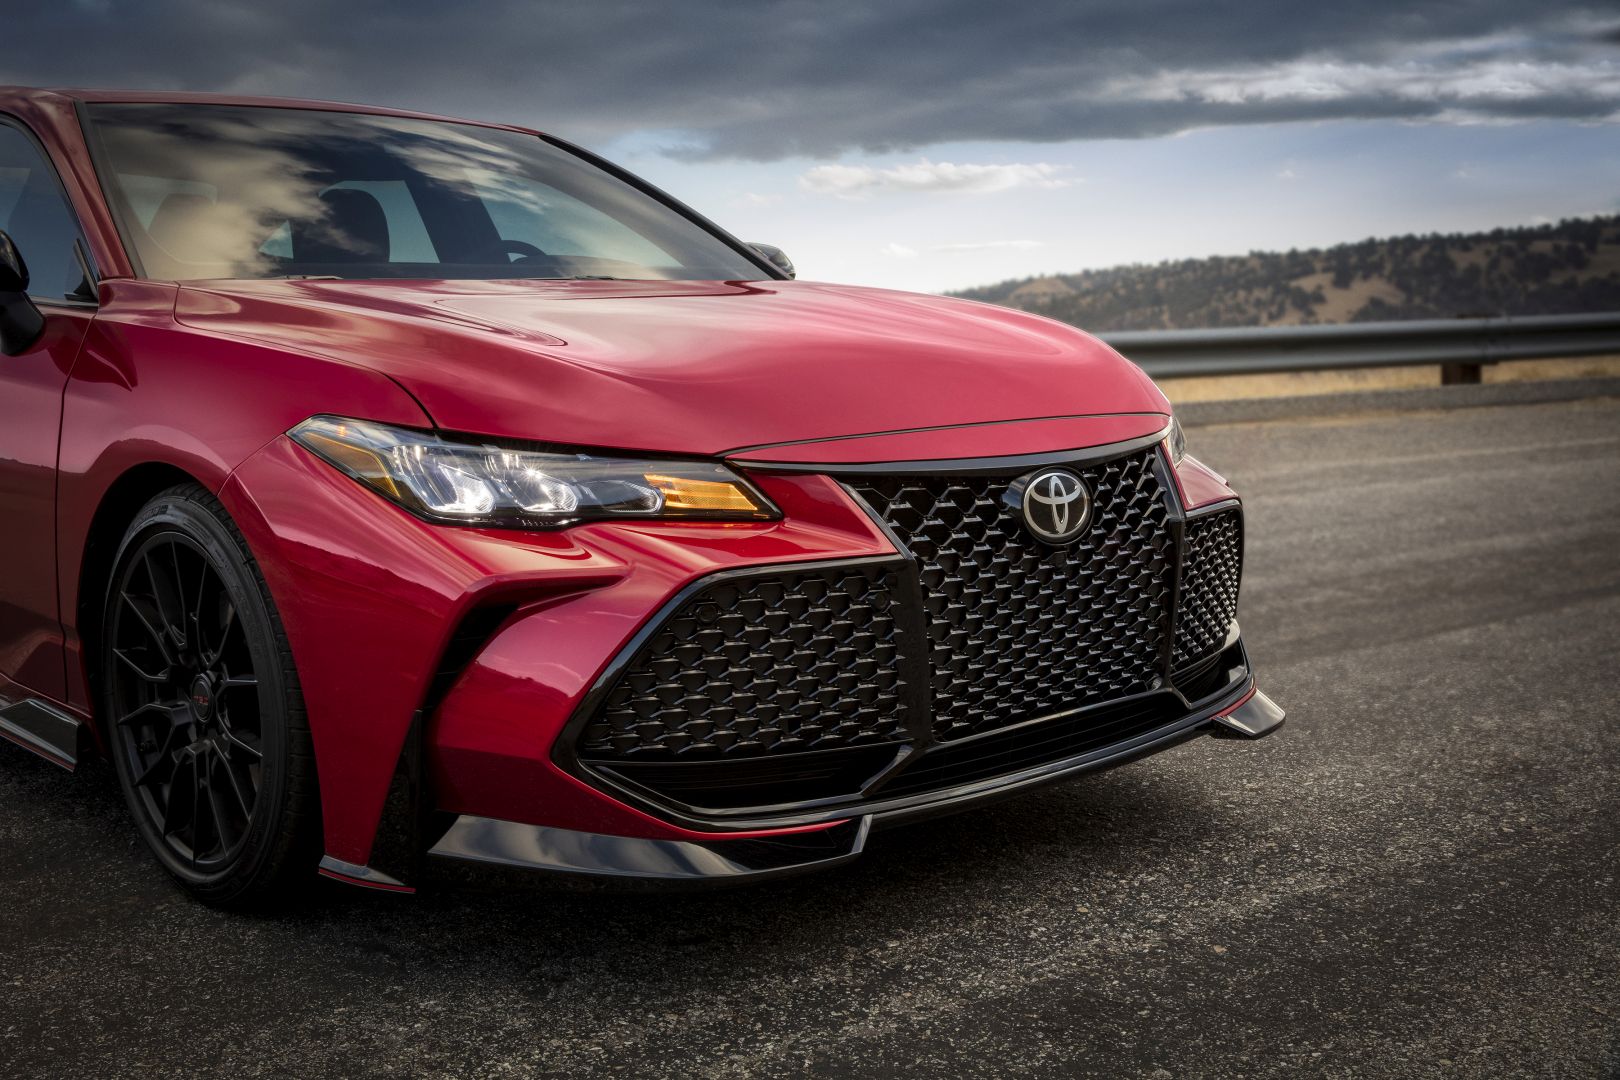 31 Best Pictures 2020 Toyota Camry Sport Specs : 2020 Toyota Camry Reviews - Research Camry Prices & Specs ...